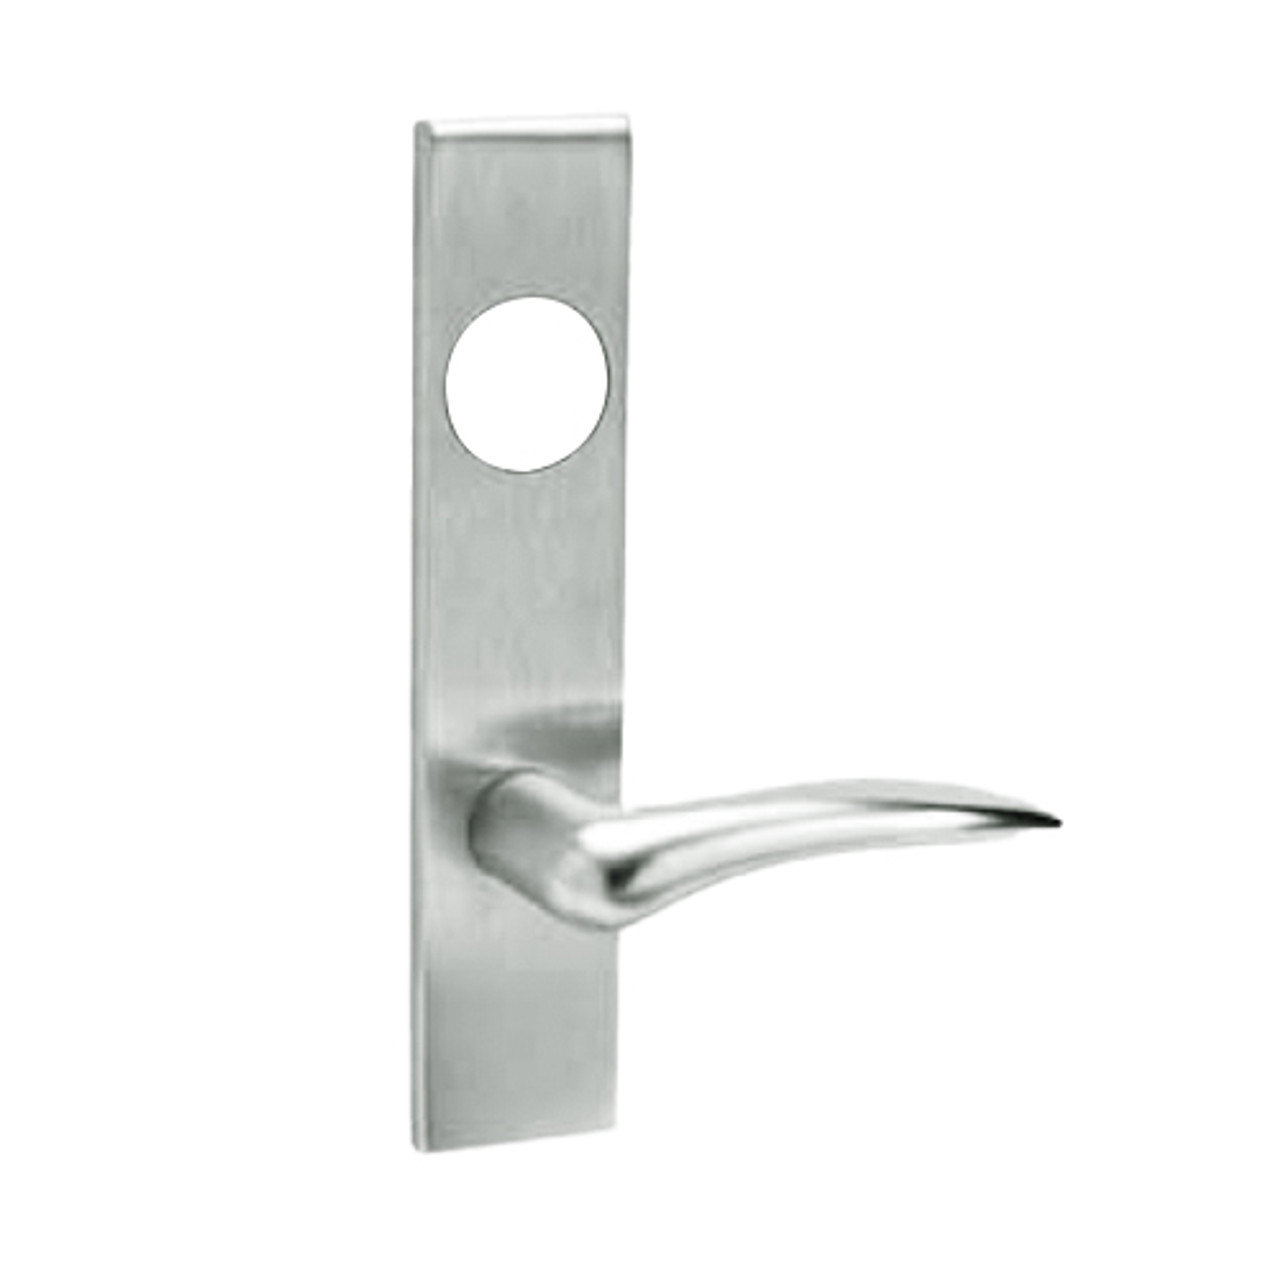 ML2067-DSR-618-LC-LH Corbin Russwin ML2000 Series Mortise Apartment Locksets with Dirke Lever in Bright Nickel